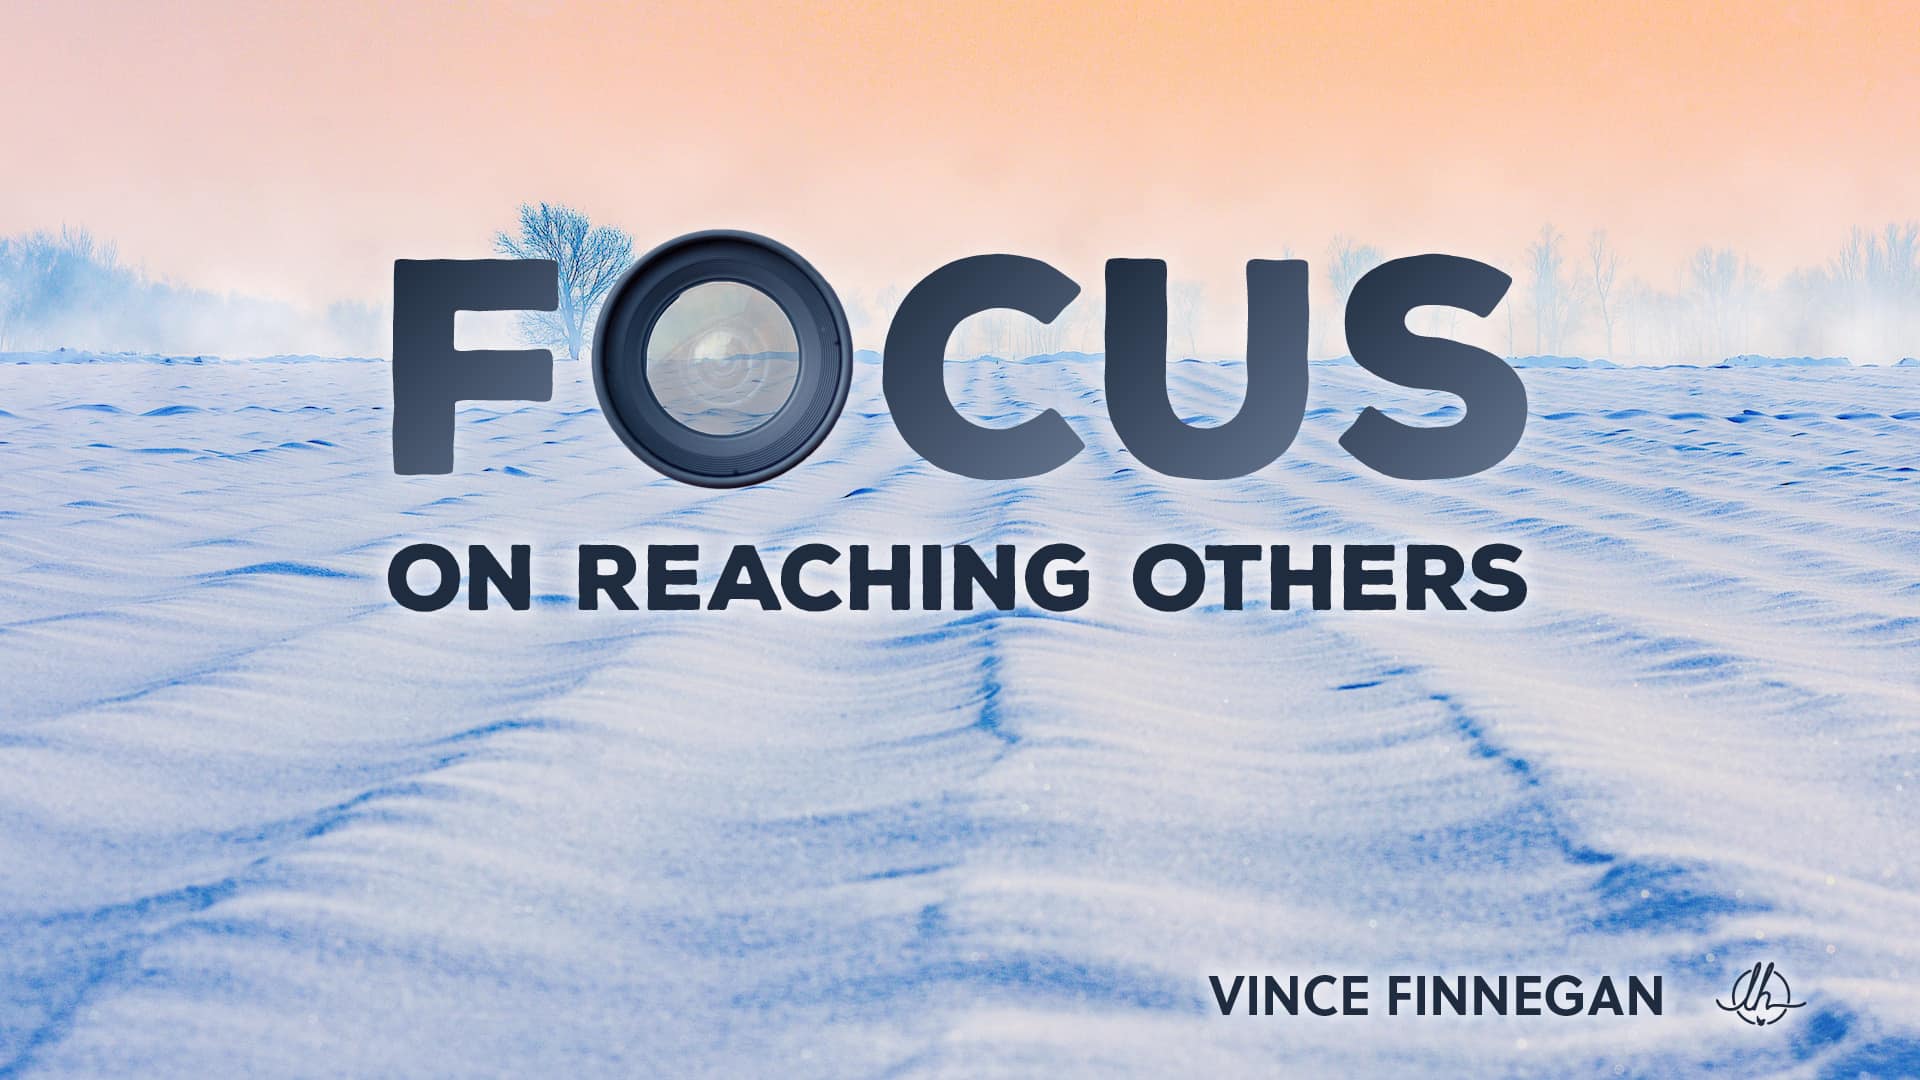 Focus on Reaching Others